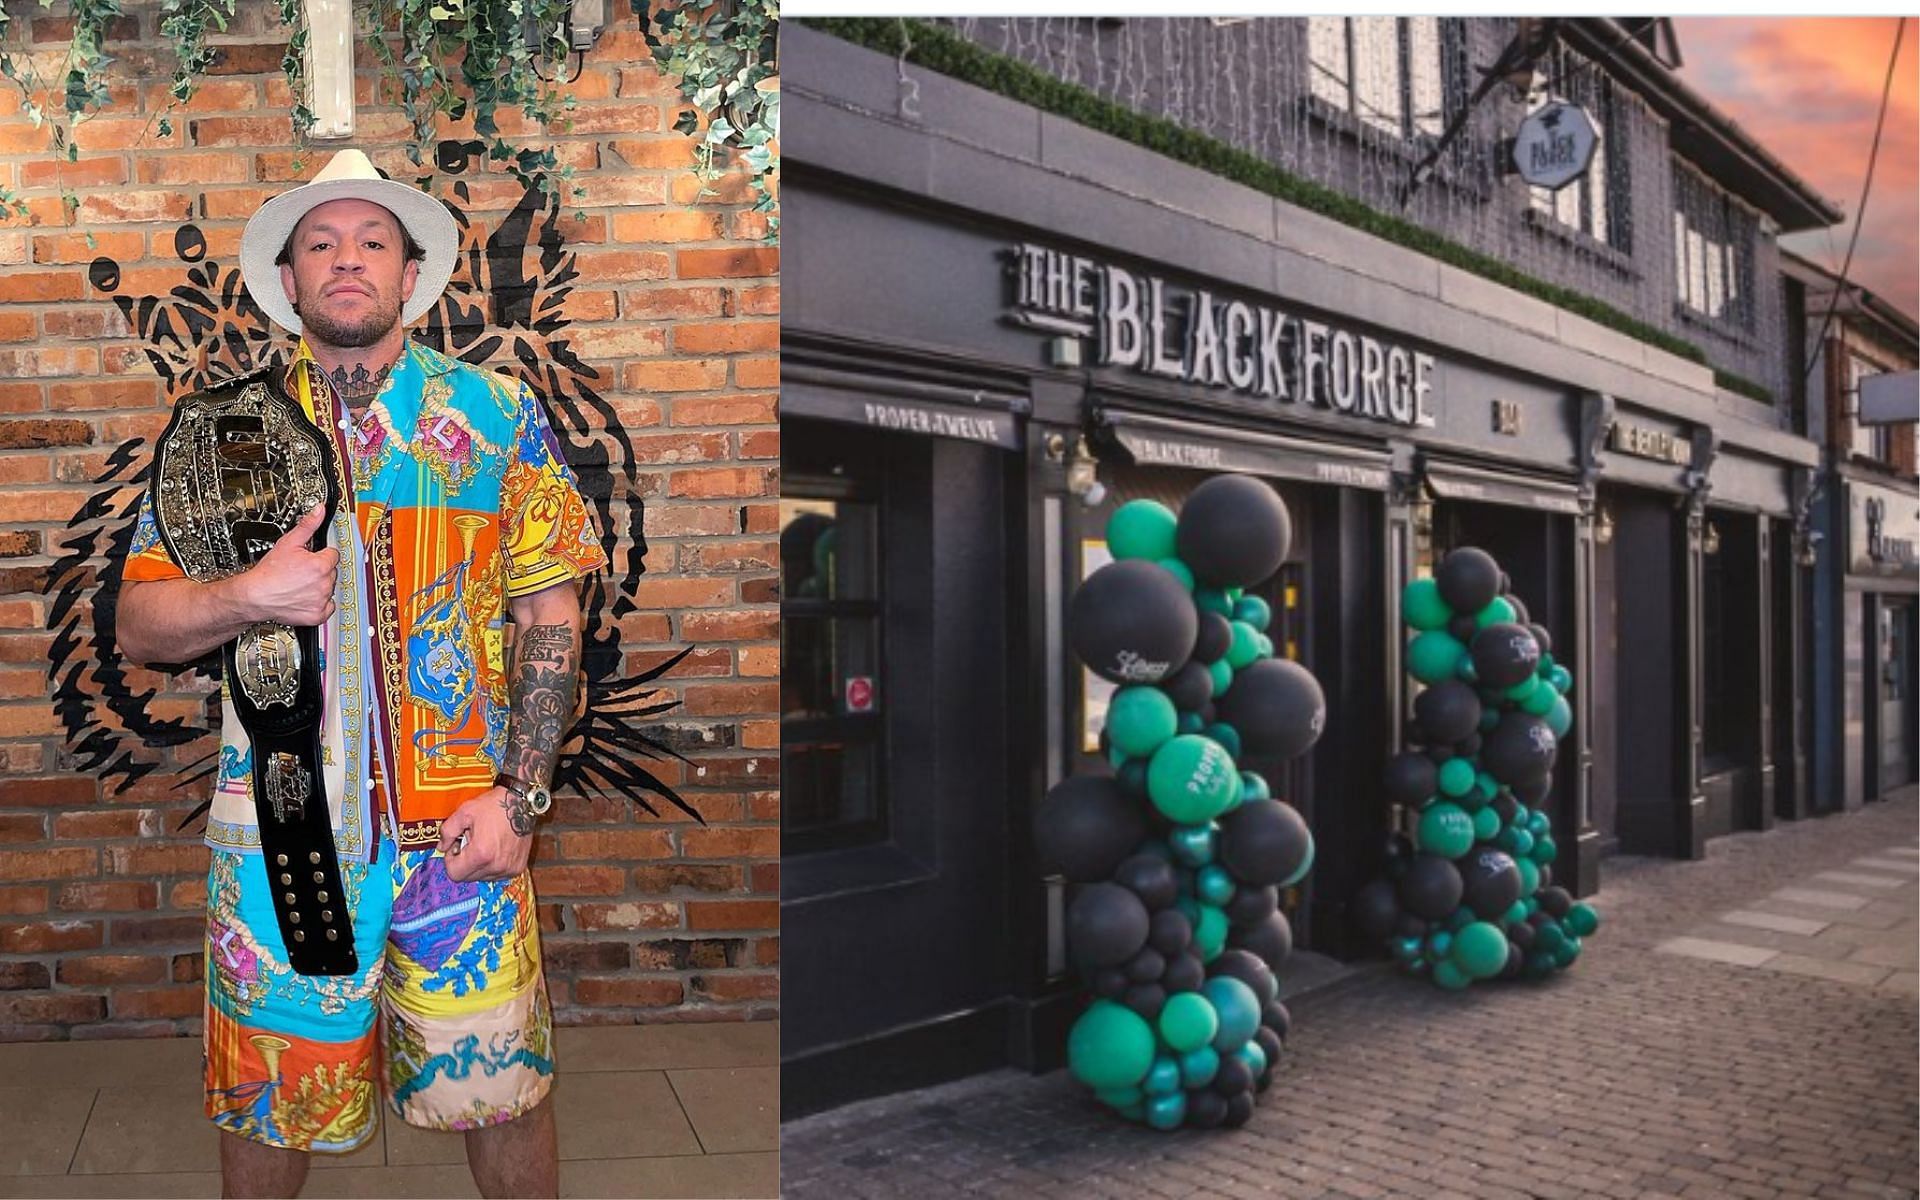 Conor McGregor inside The Black Forge Inn (left) and The Black Forge Inn (right) (Image credits @blackforgeinn and @TheNotoriousMMA on X